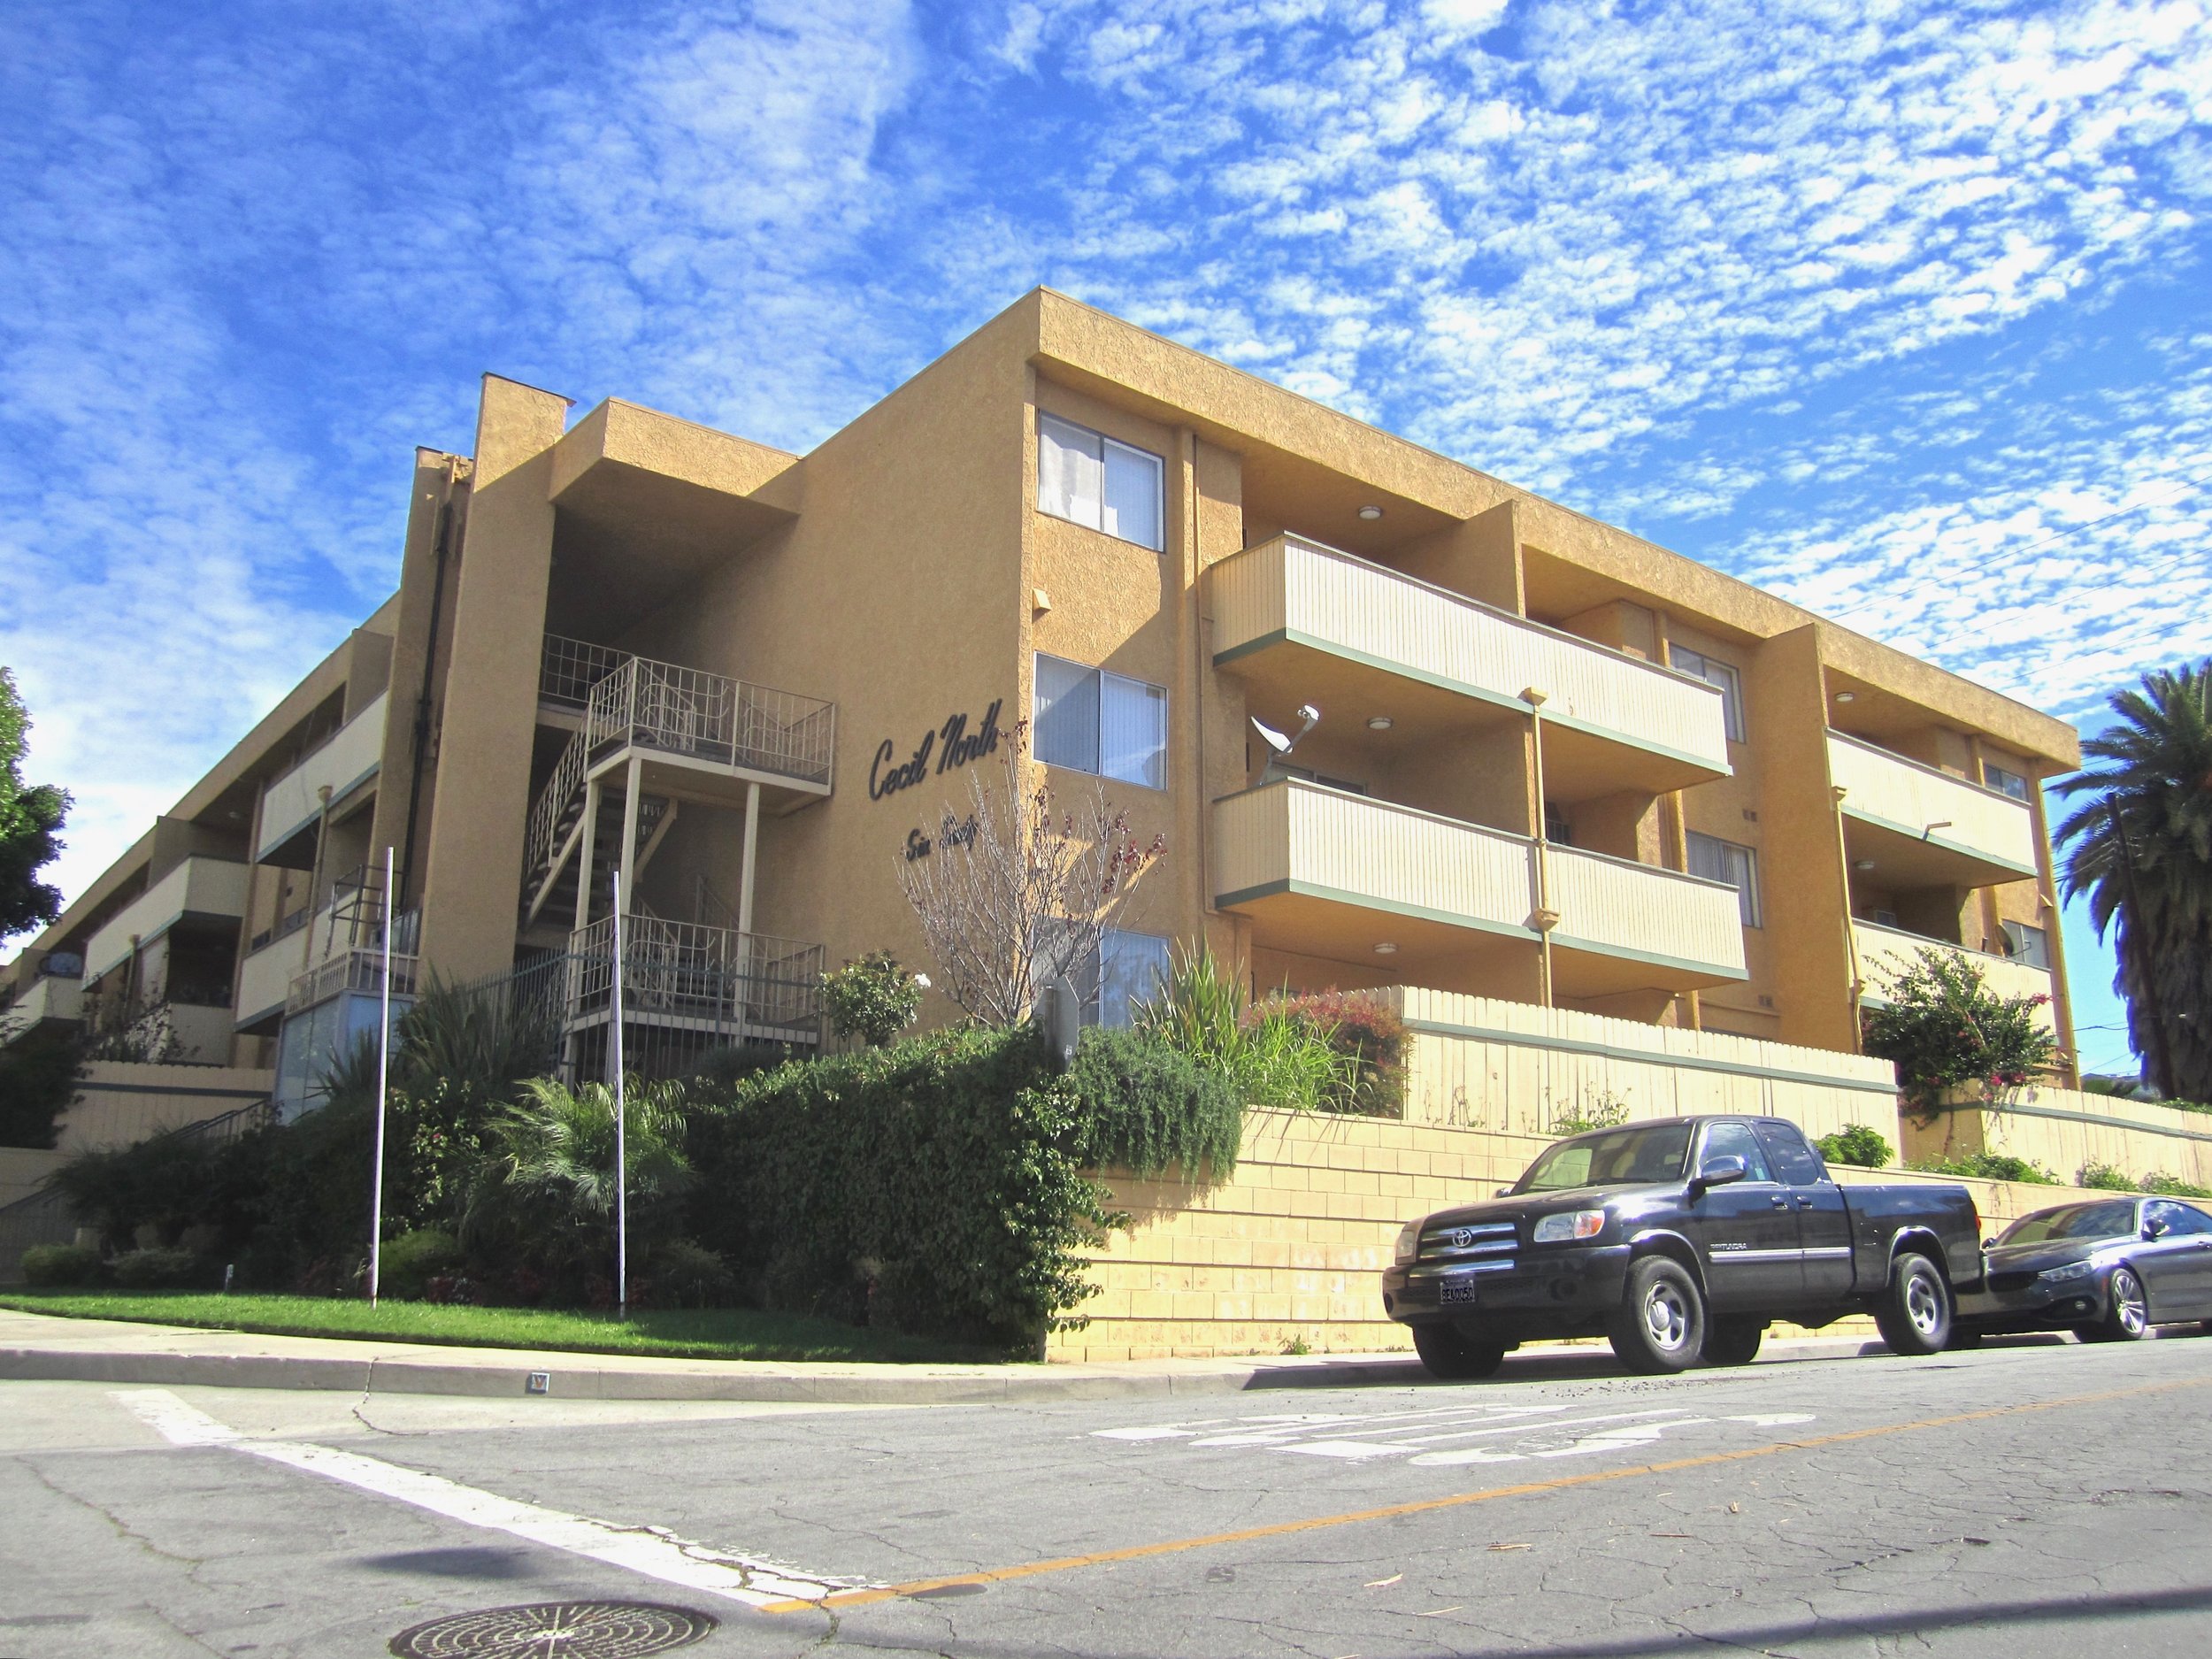 Brown apartment building located on a corner lot with balconies facing the street.